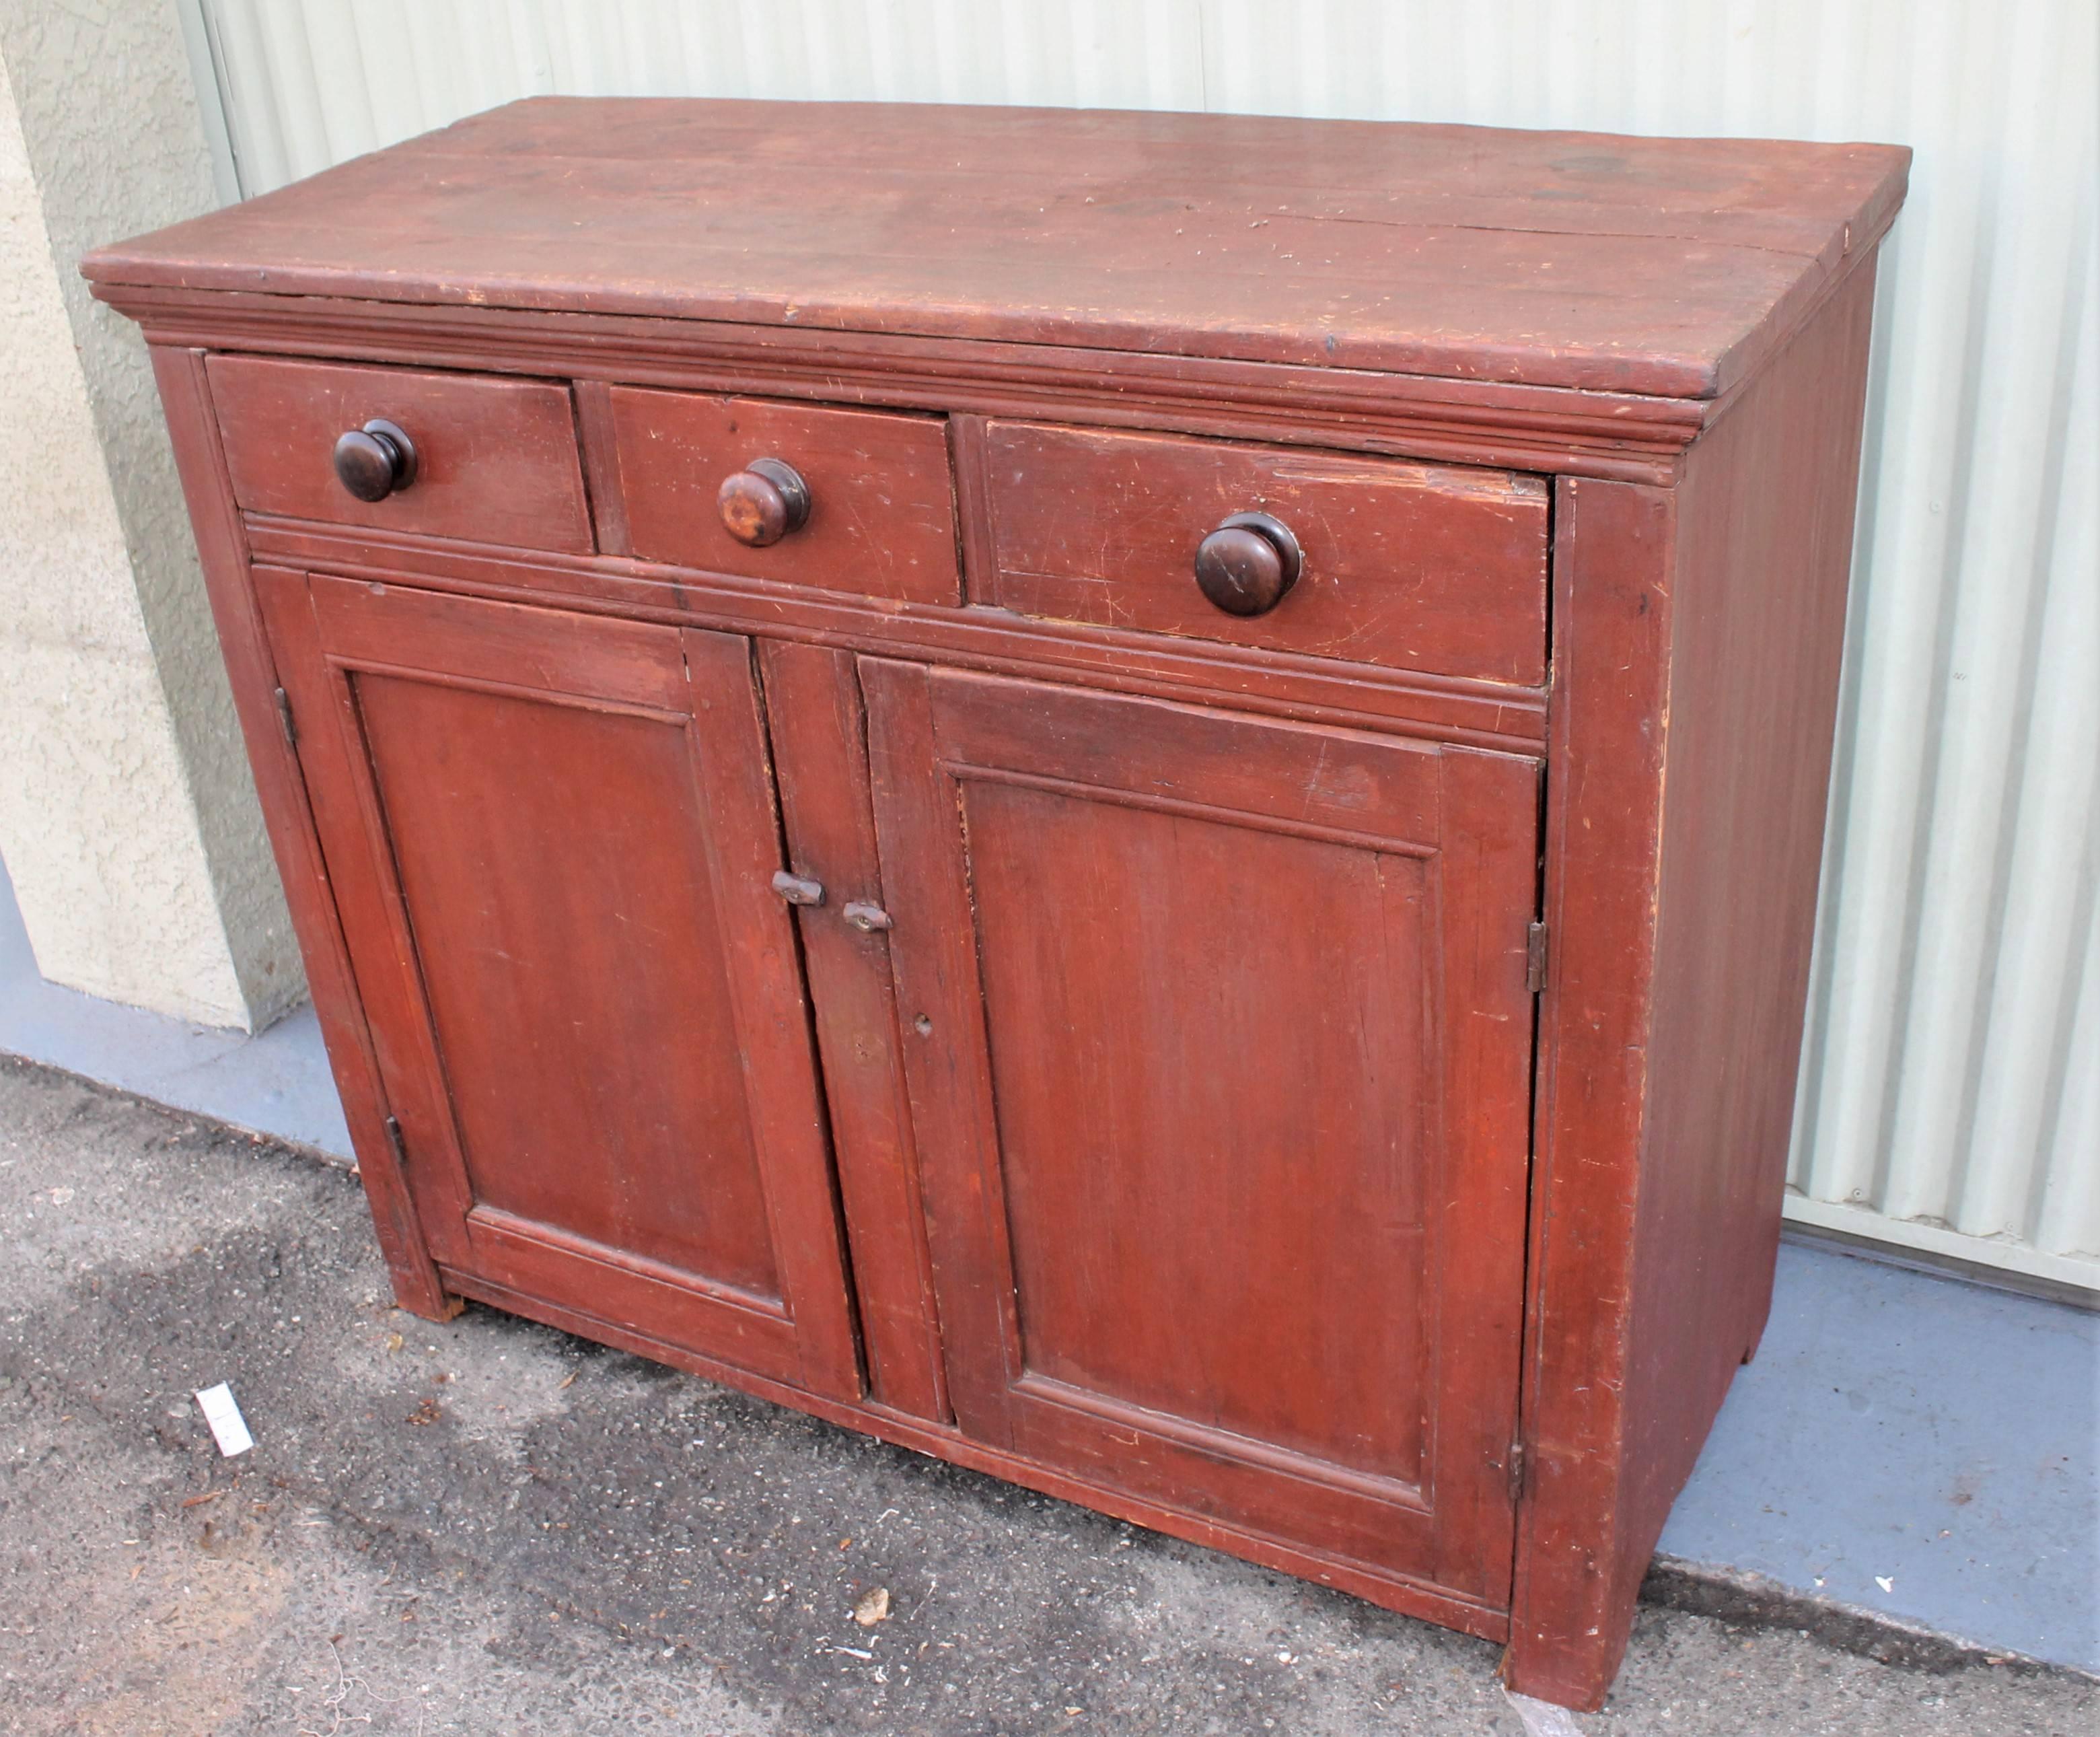 This original red painted jelly cupboard with original three drawers over two doors. The condition is very good.